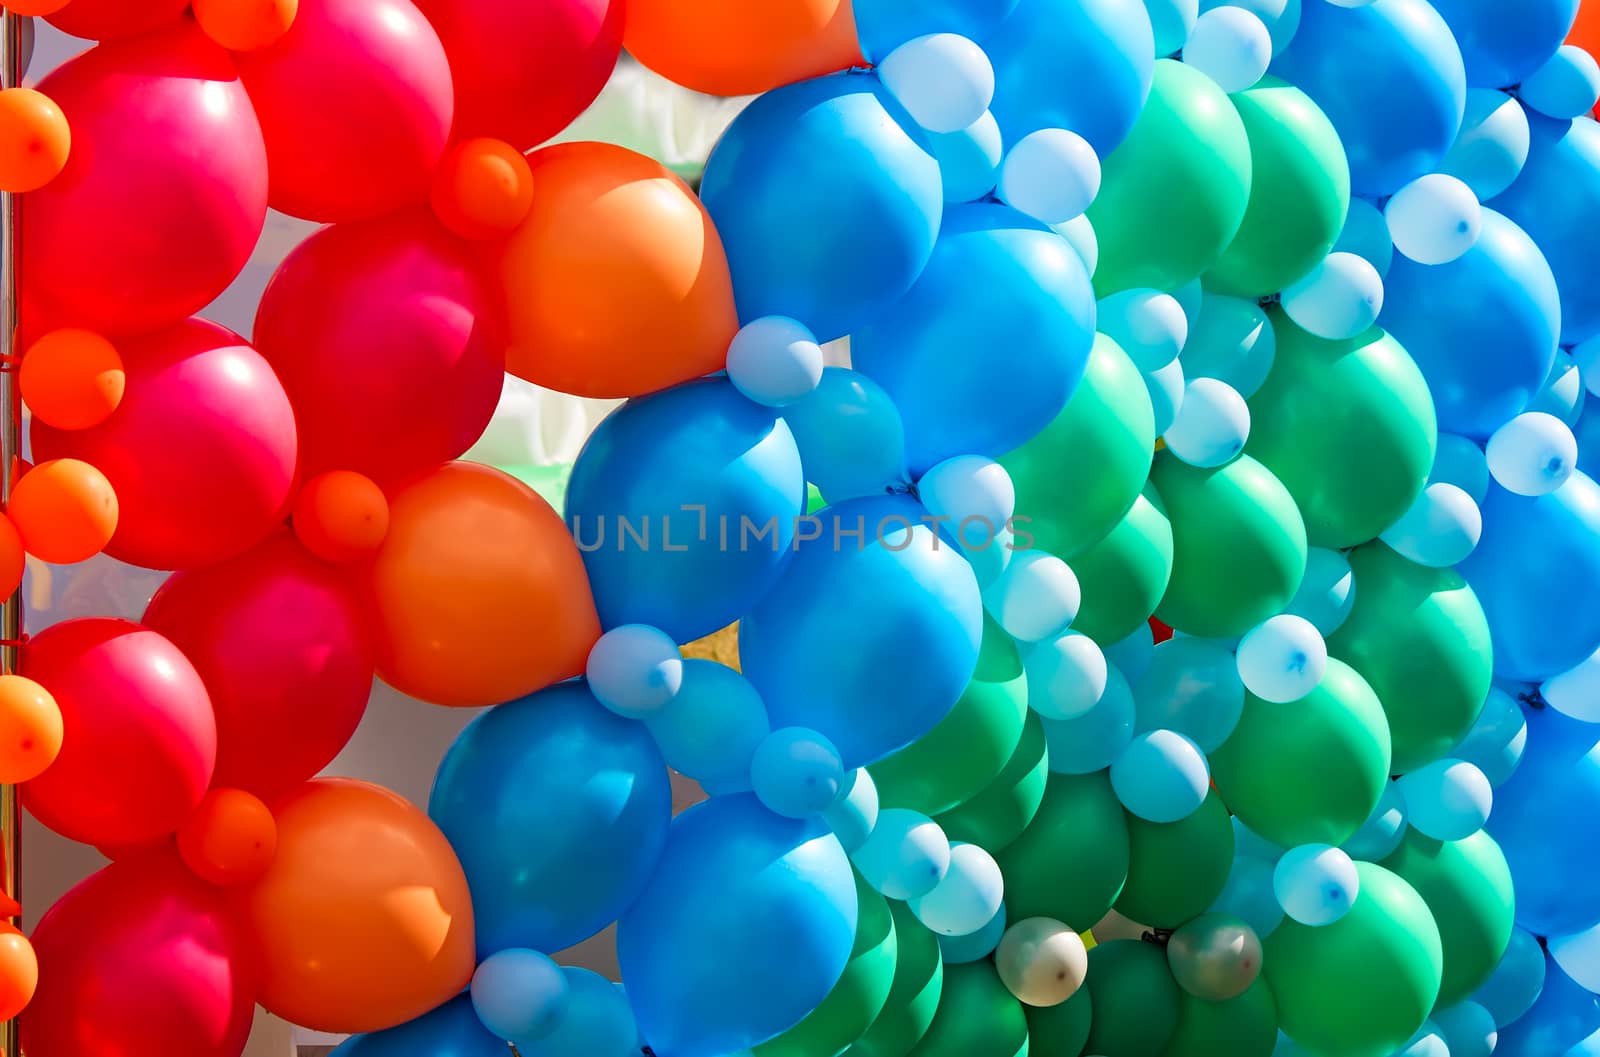 A large number of beautiful red, blue and green balloons, decoration for the holiday.